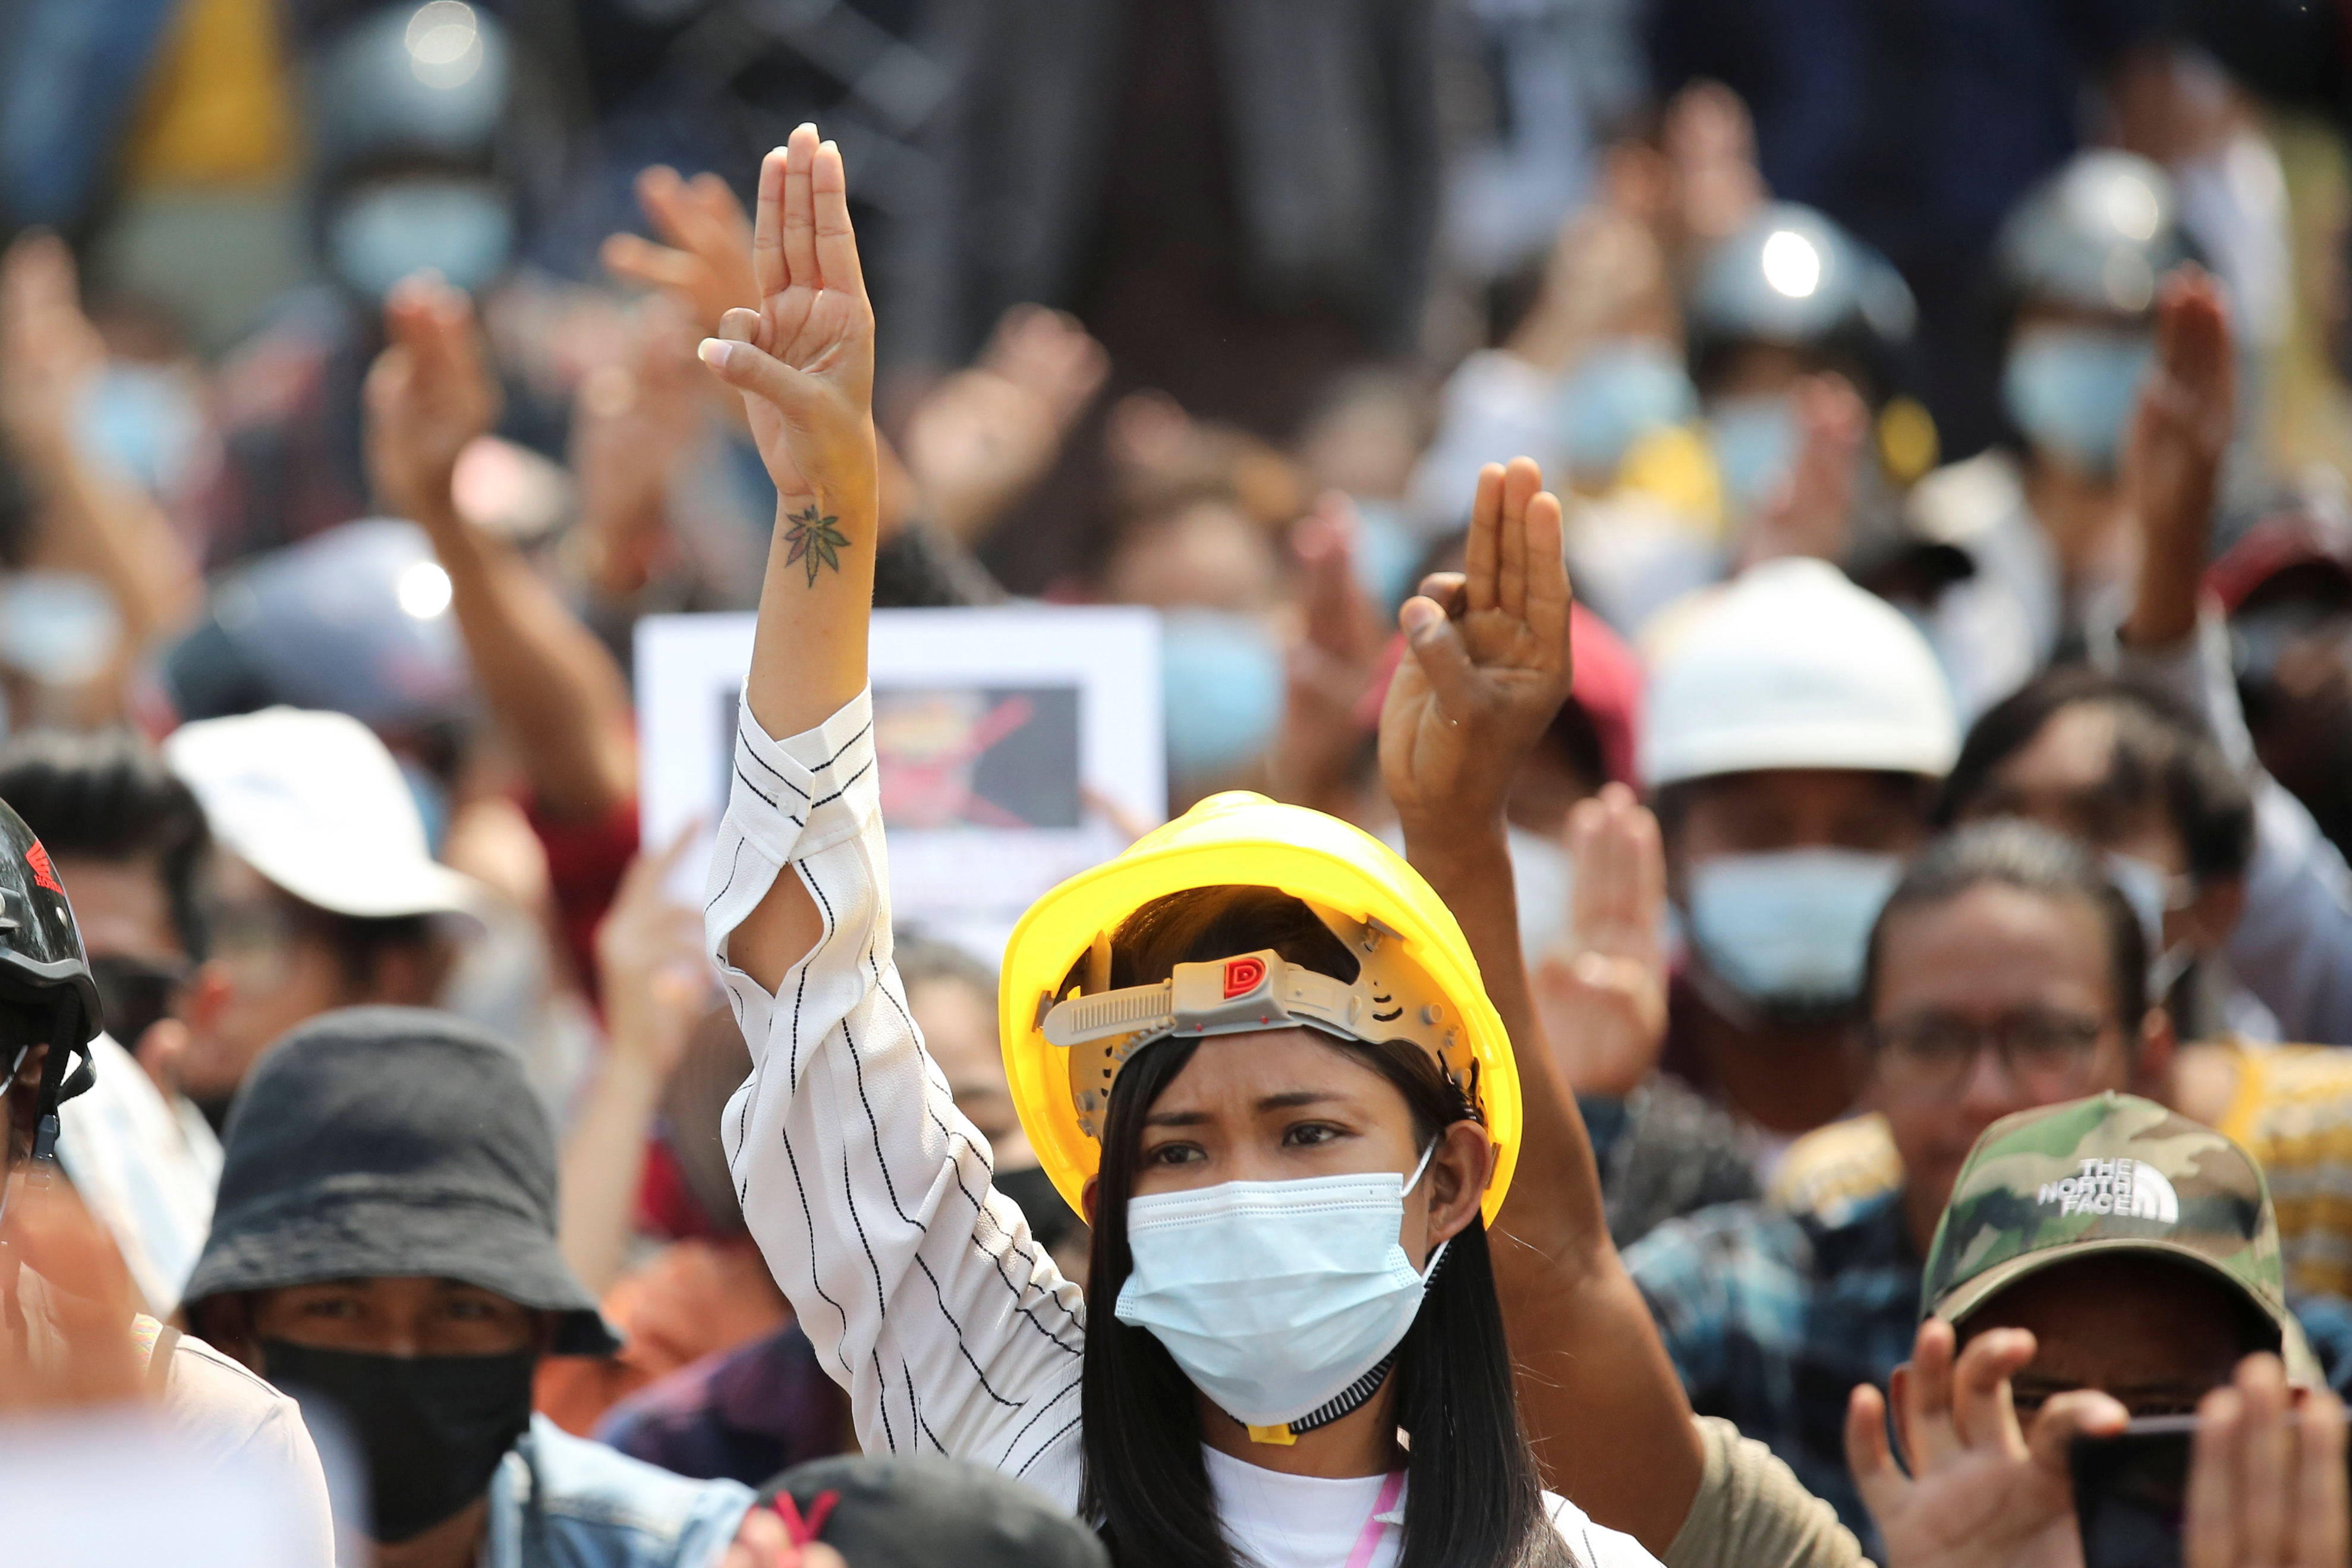 A woman shows a three-finger salute during a protest against the military coup in Naypyitaw, Myanmar, March 8, 2021. REUTERS/Stringer